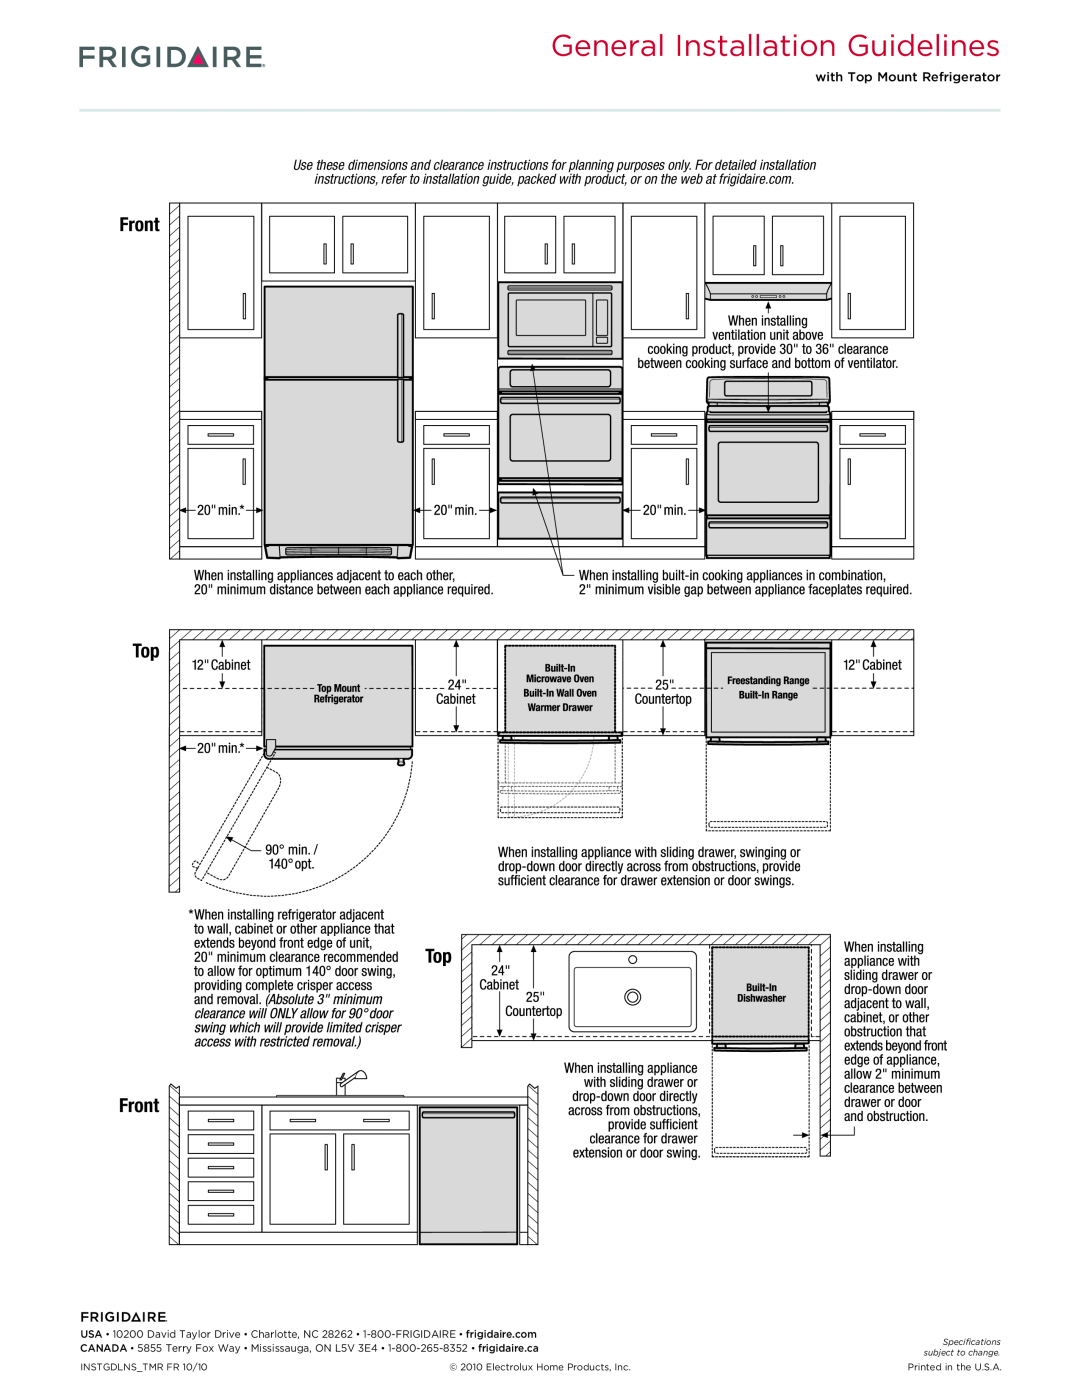 Frigidaire FGGS3065K General Installation Guidelines, Top Front, with Top Mount Refrigerator, INSTGDLNS TMR FR 10/10 